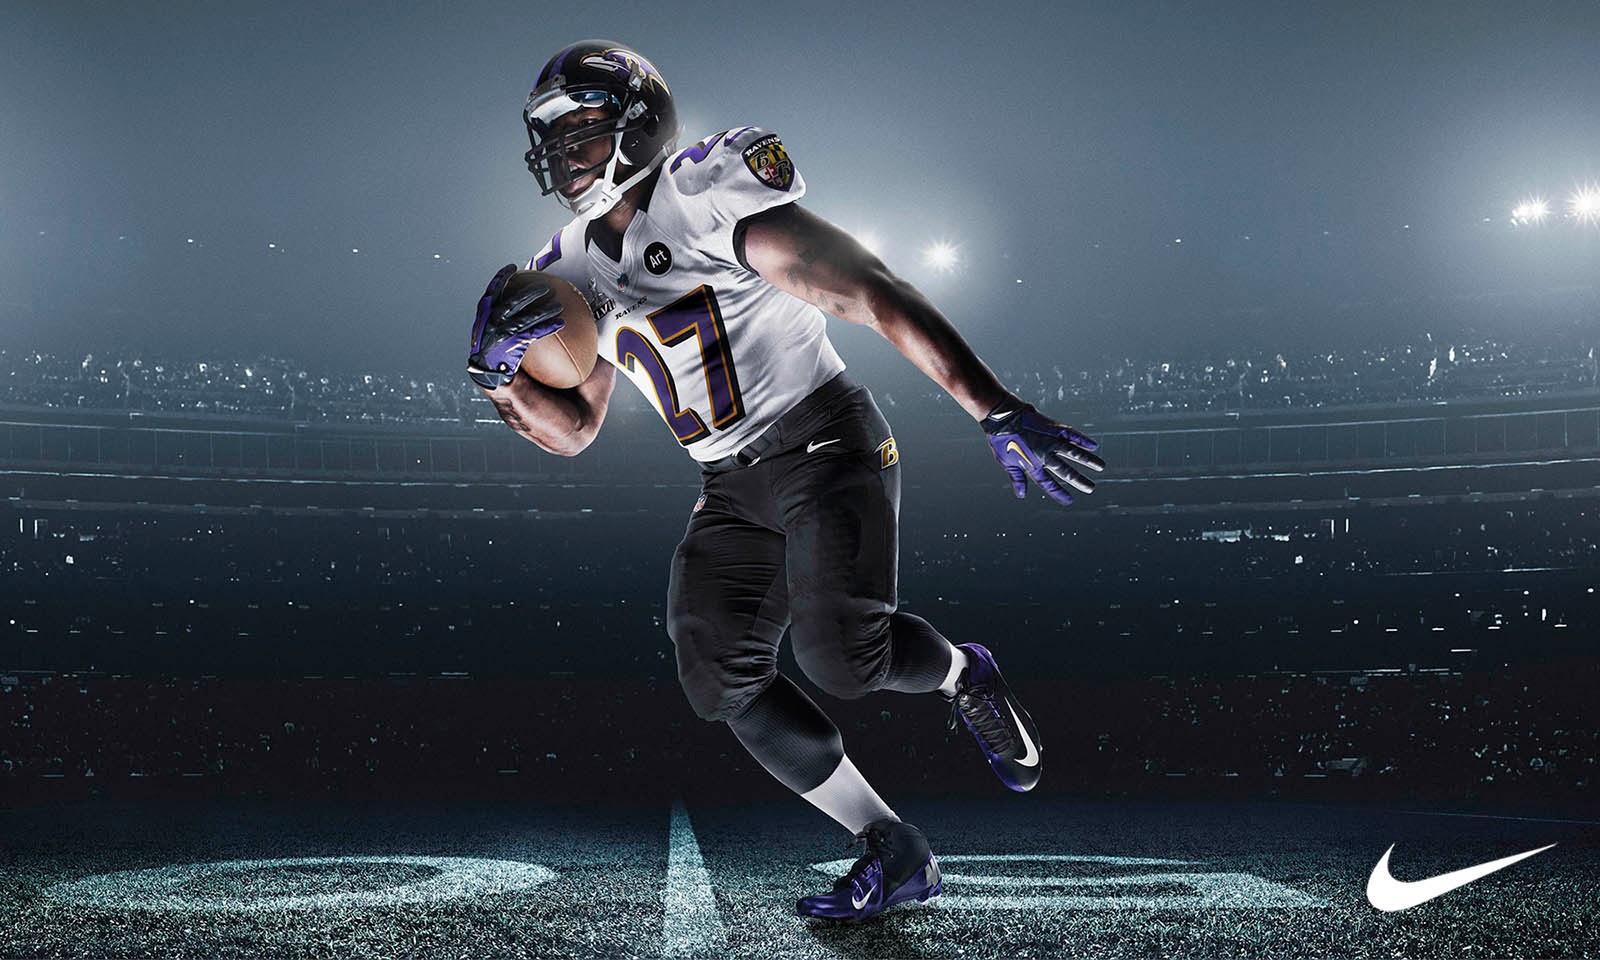 Nfl Player Ray Rice HD Wallpaper Collection